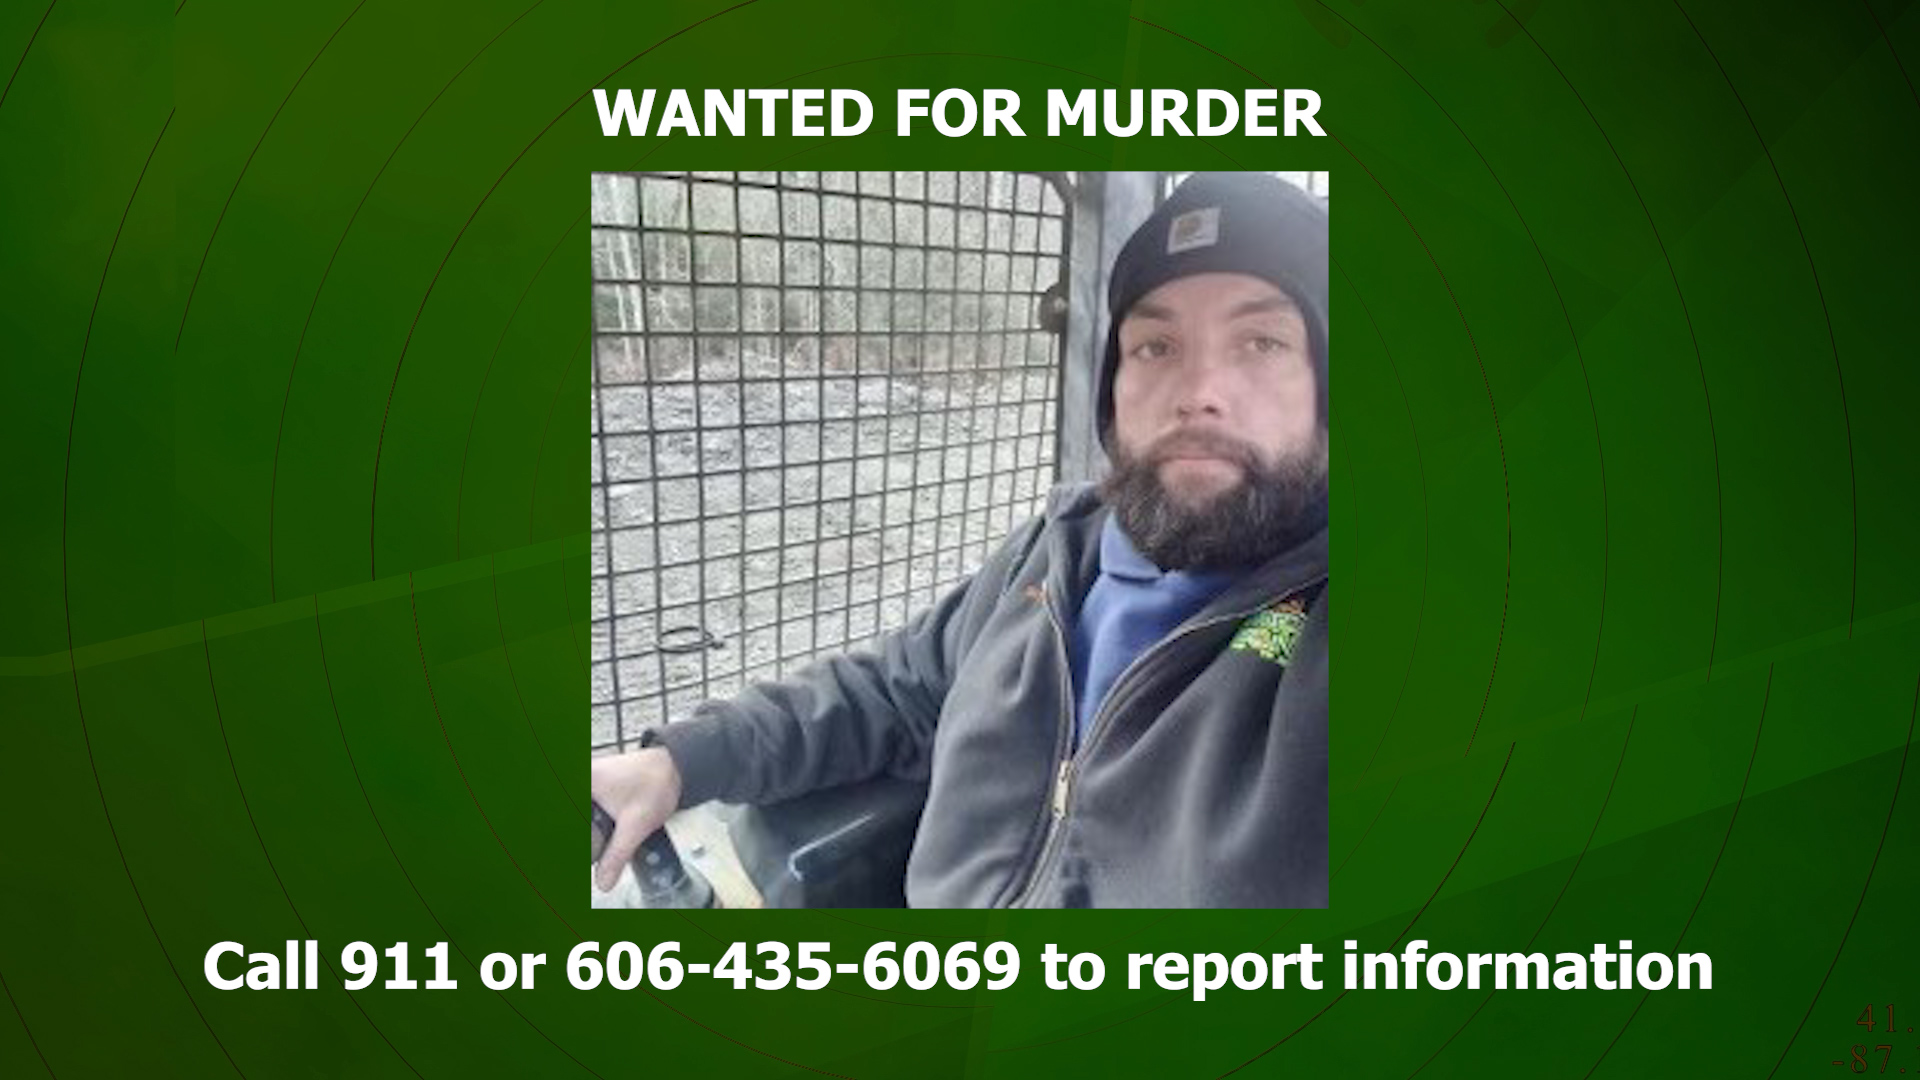 Letcher man wanted for woman’s murder